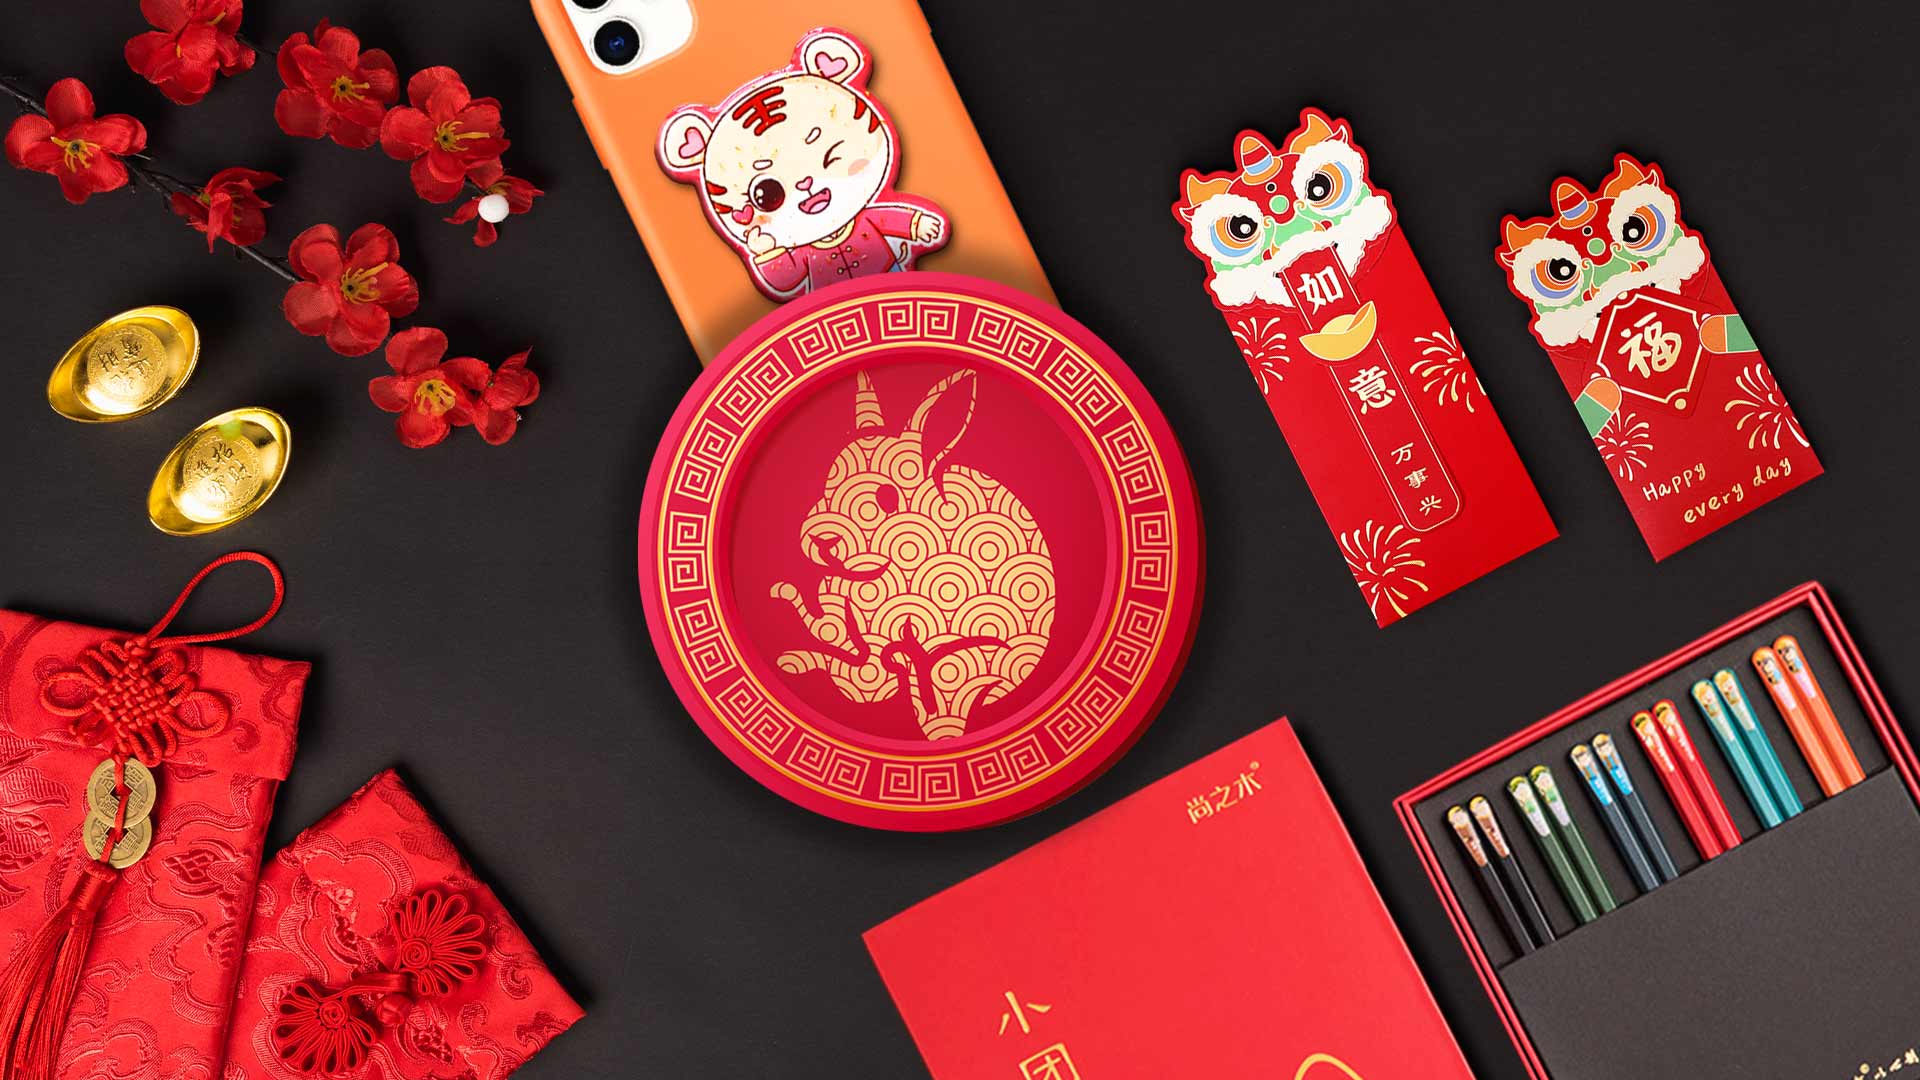 Usher in good luck with Chinese New Year decorations